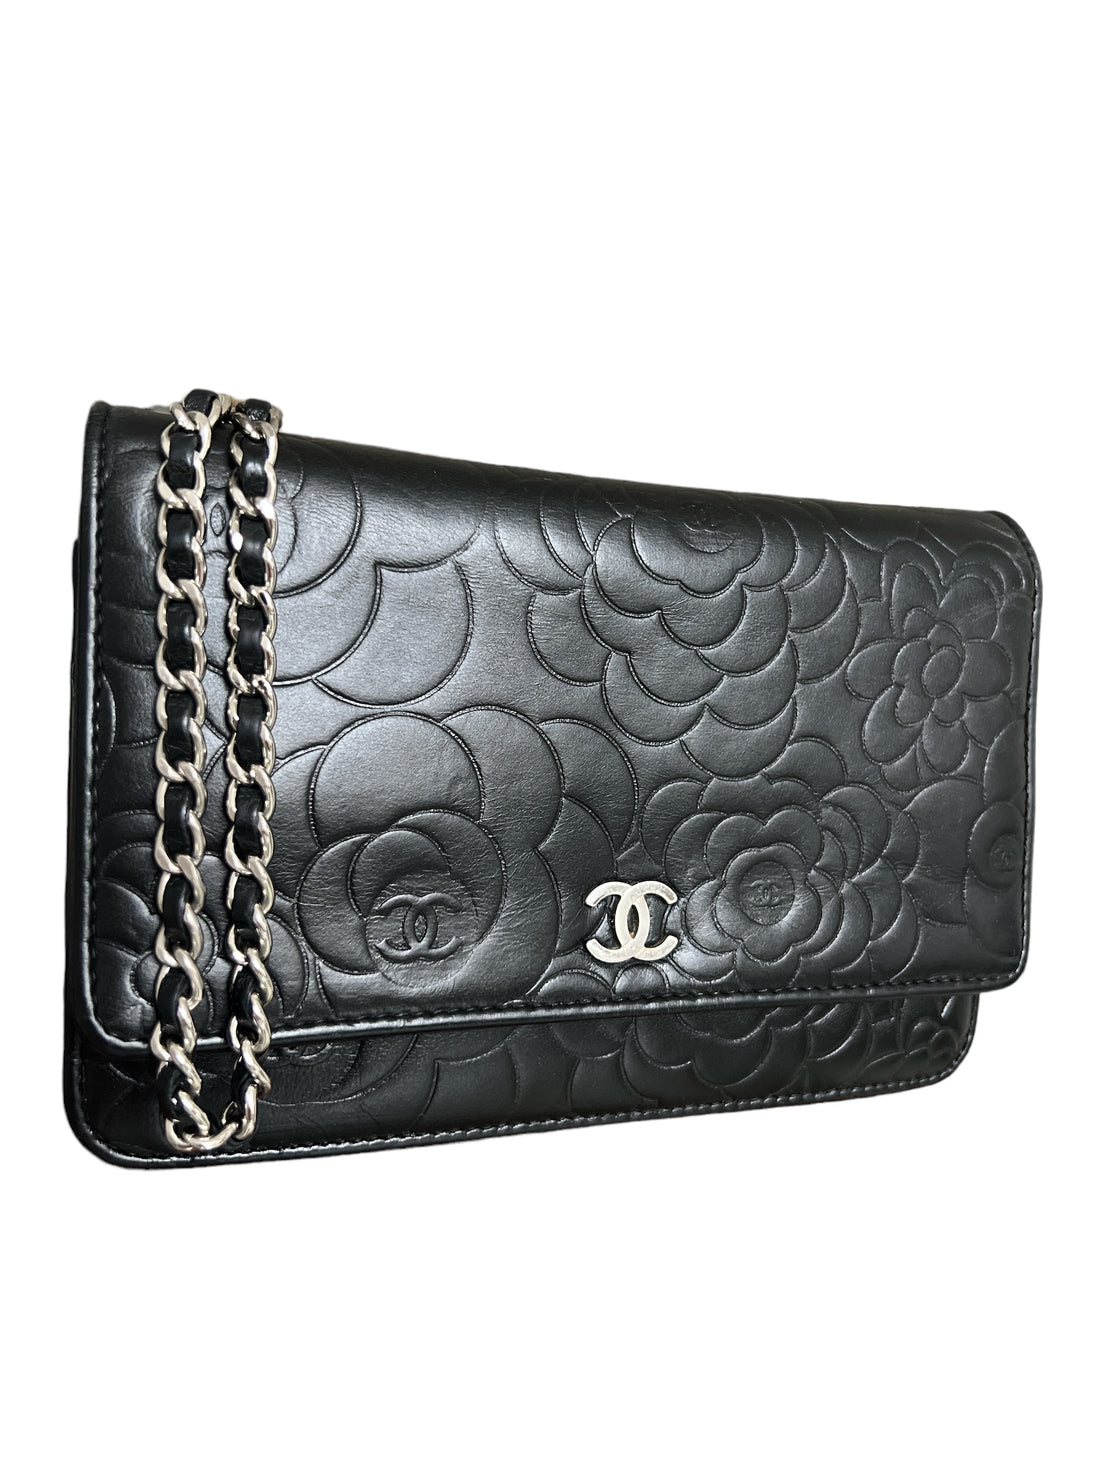 Chanel WOC Wallet on Chain Camellia